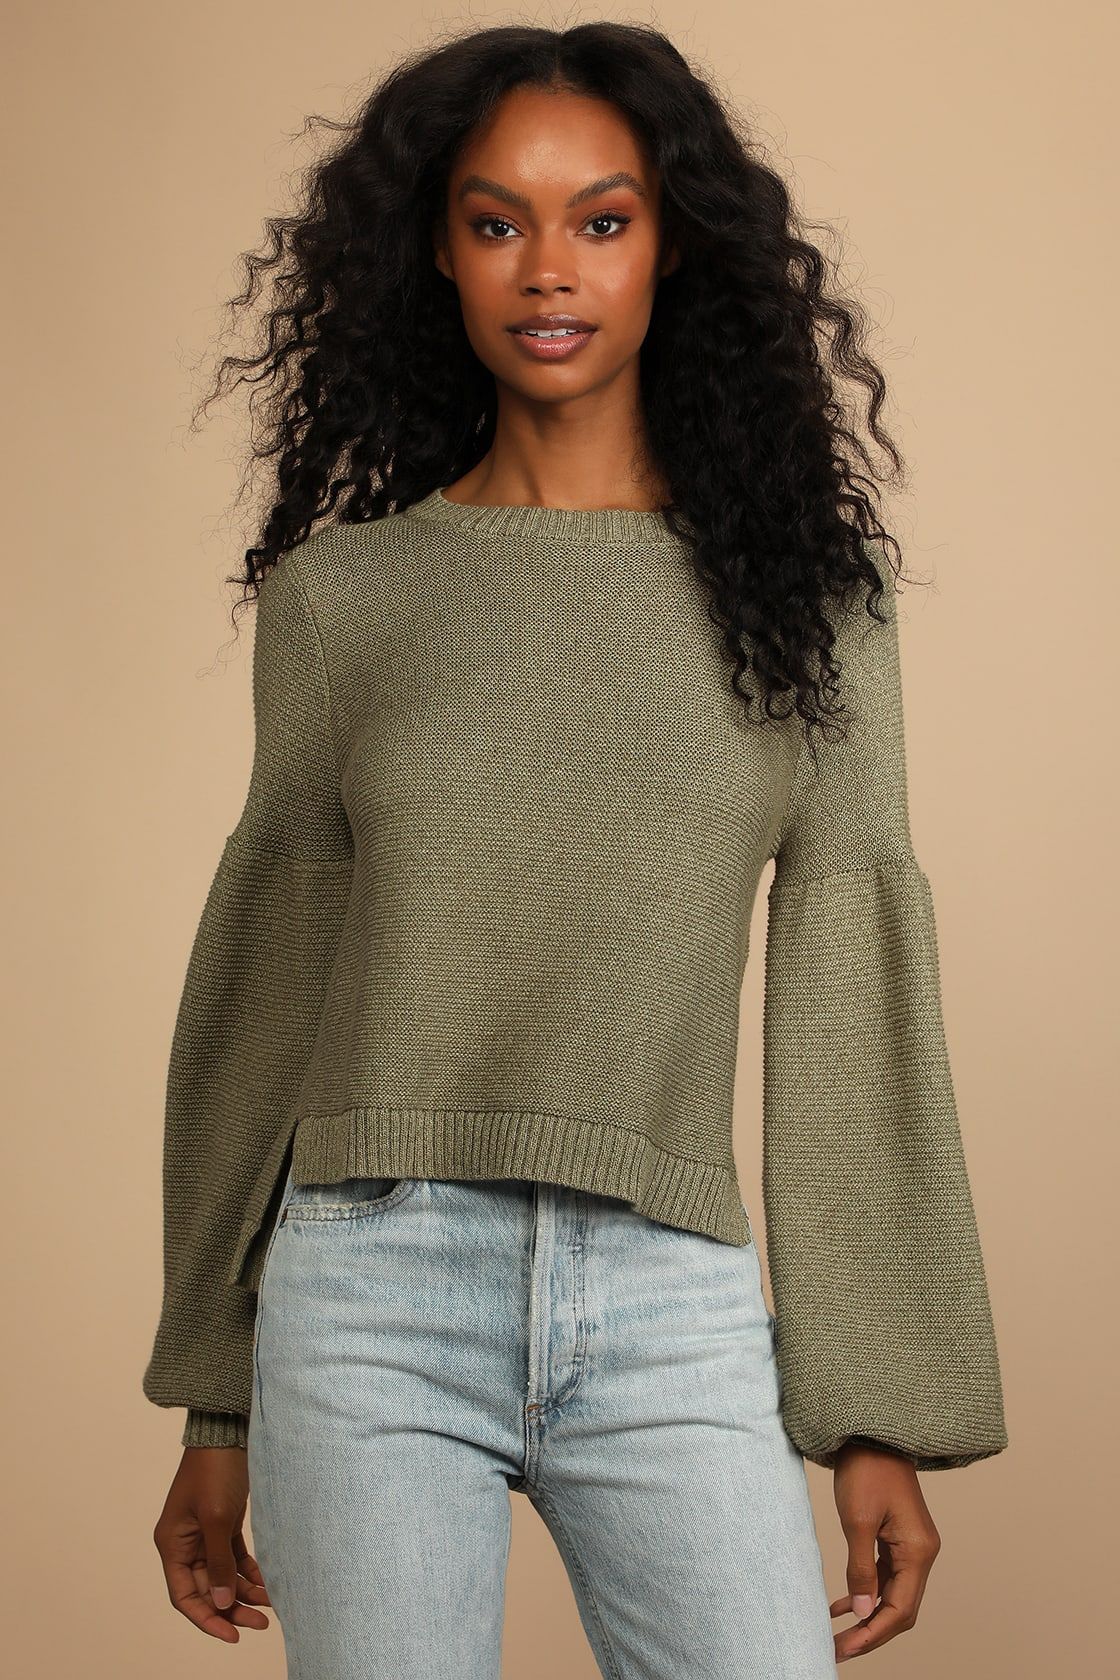 Catch You Later Olive Green Balloon Sleeve Sweater | Lulus (US)